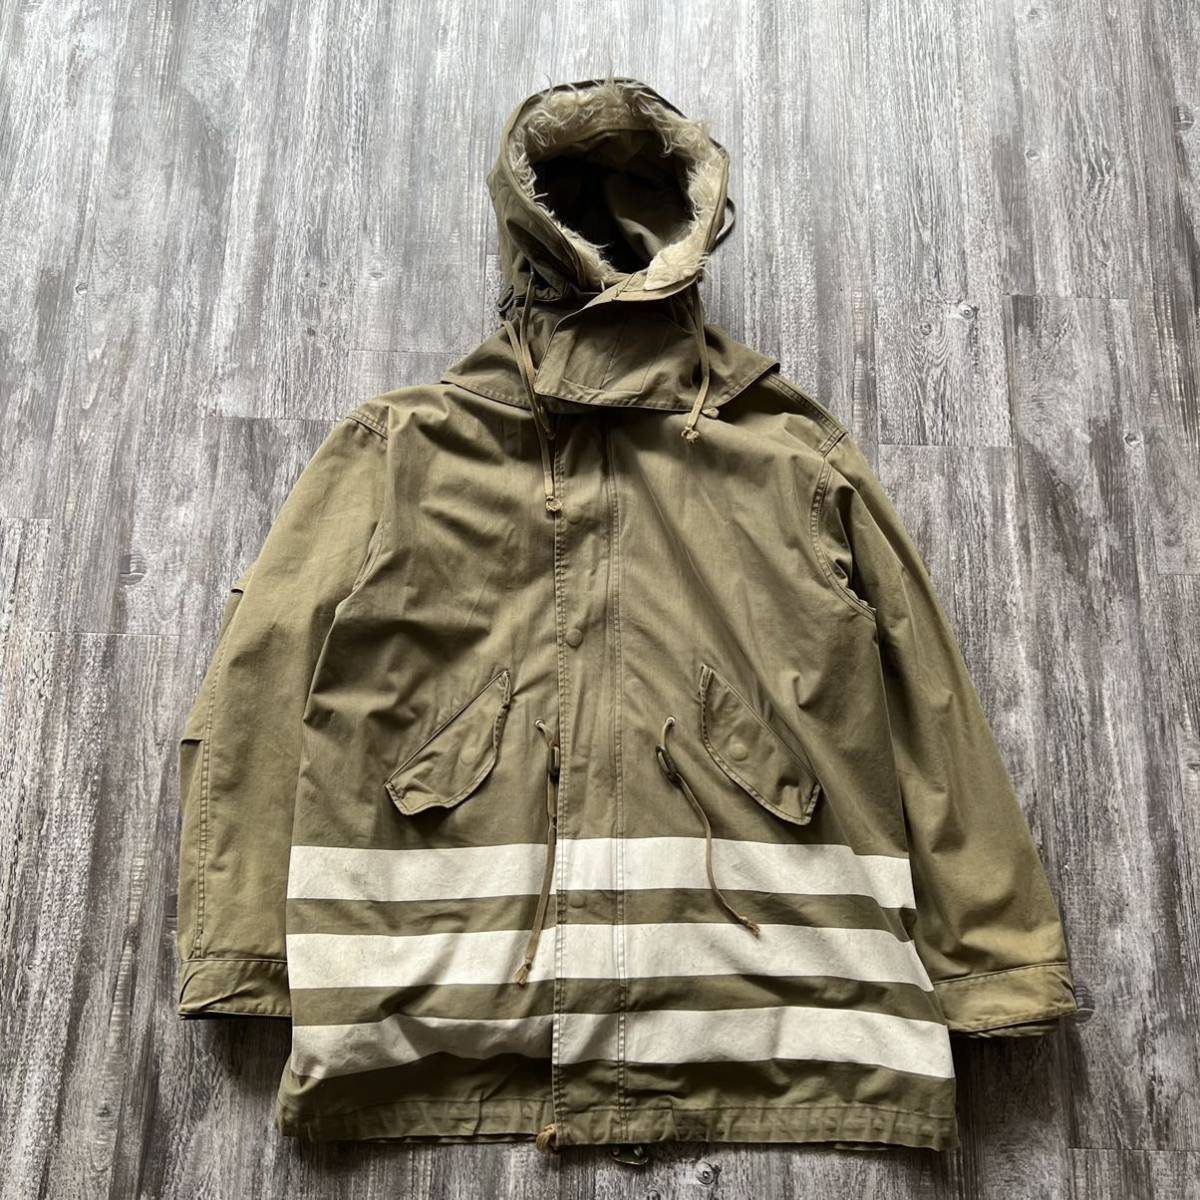 AW1997 HELMUT LANG M-65 type Painted Coat ヘルムートラング